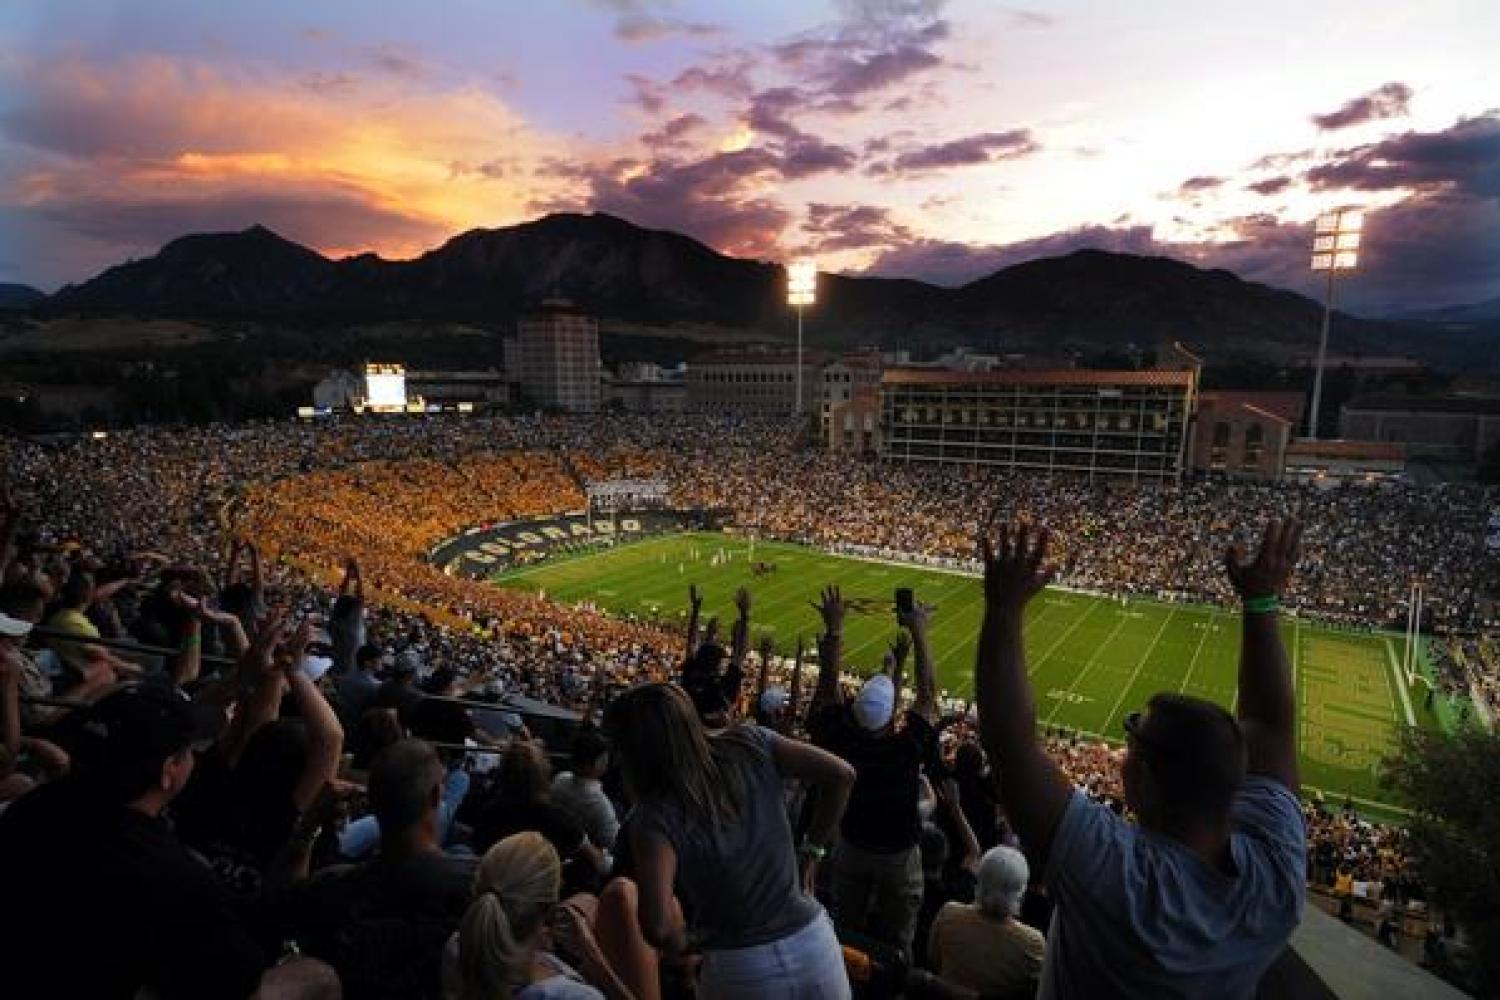 The Colorado Buffaloes play at Folsom Field, named after a famous Colorado Law professor who also was the head football coach